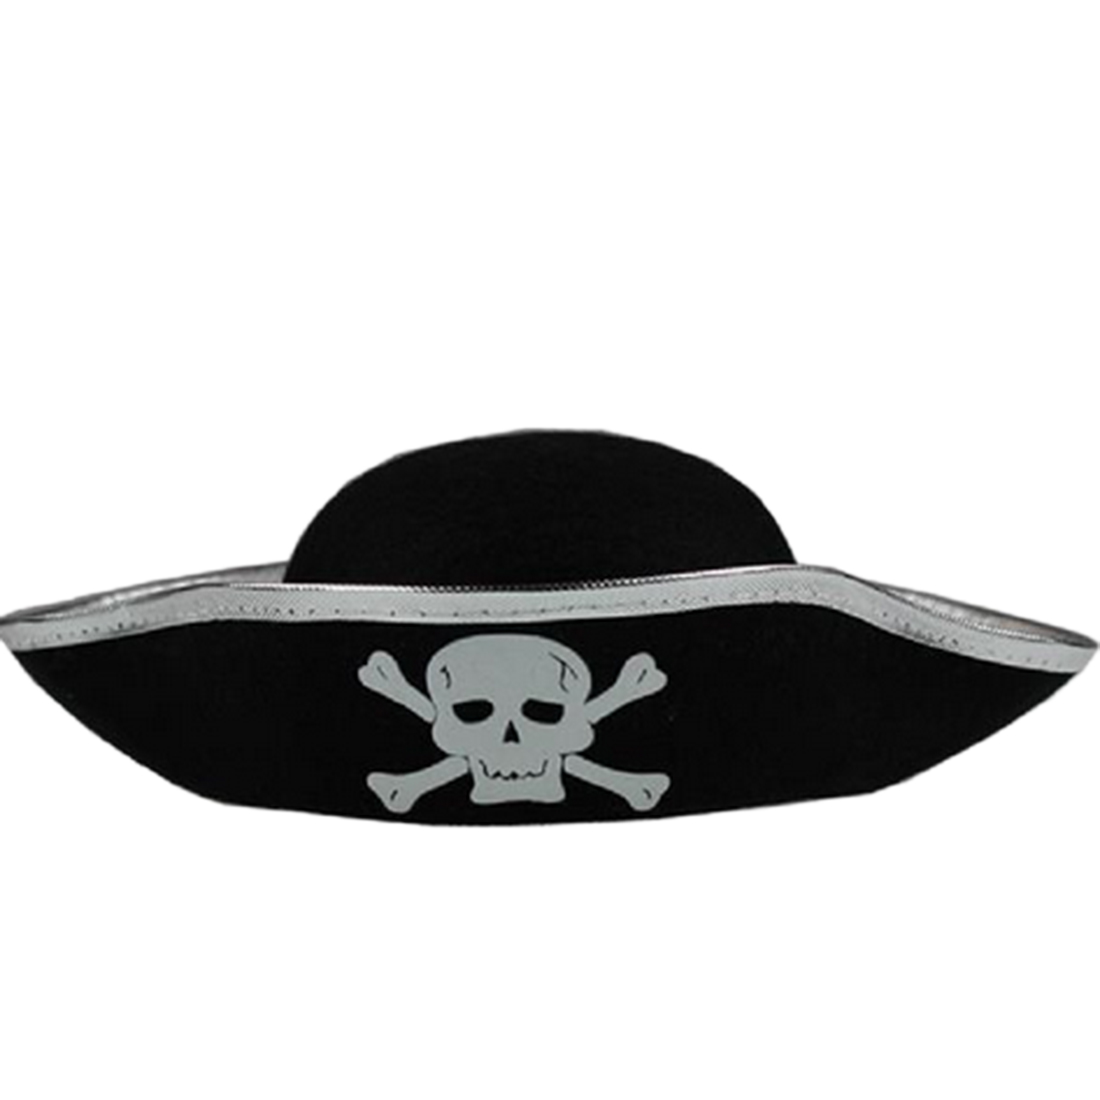 Popular Black Pirate Hat-Buy Cheap Black Pirate Hat lots from ...